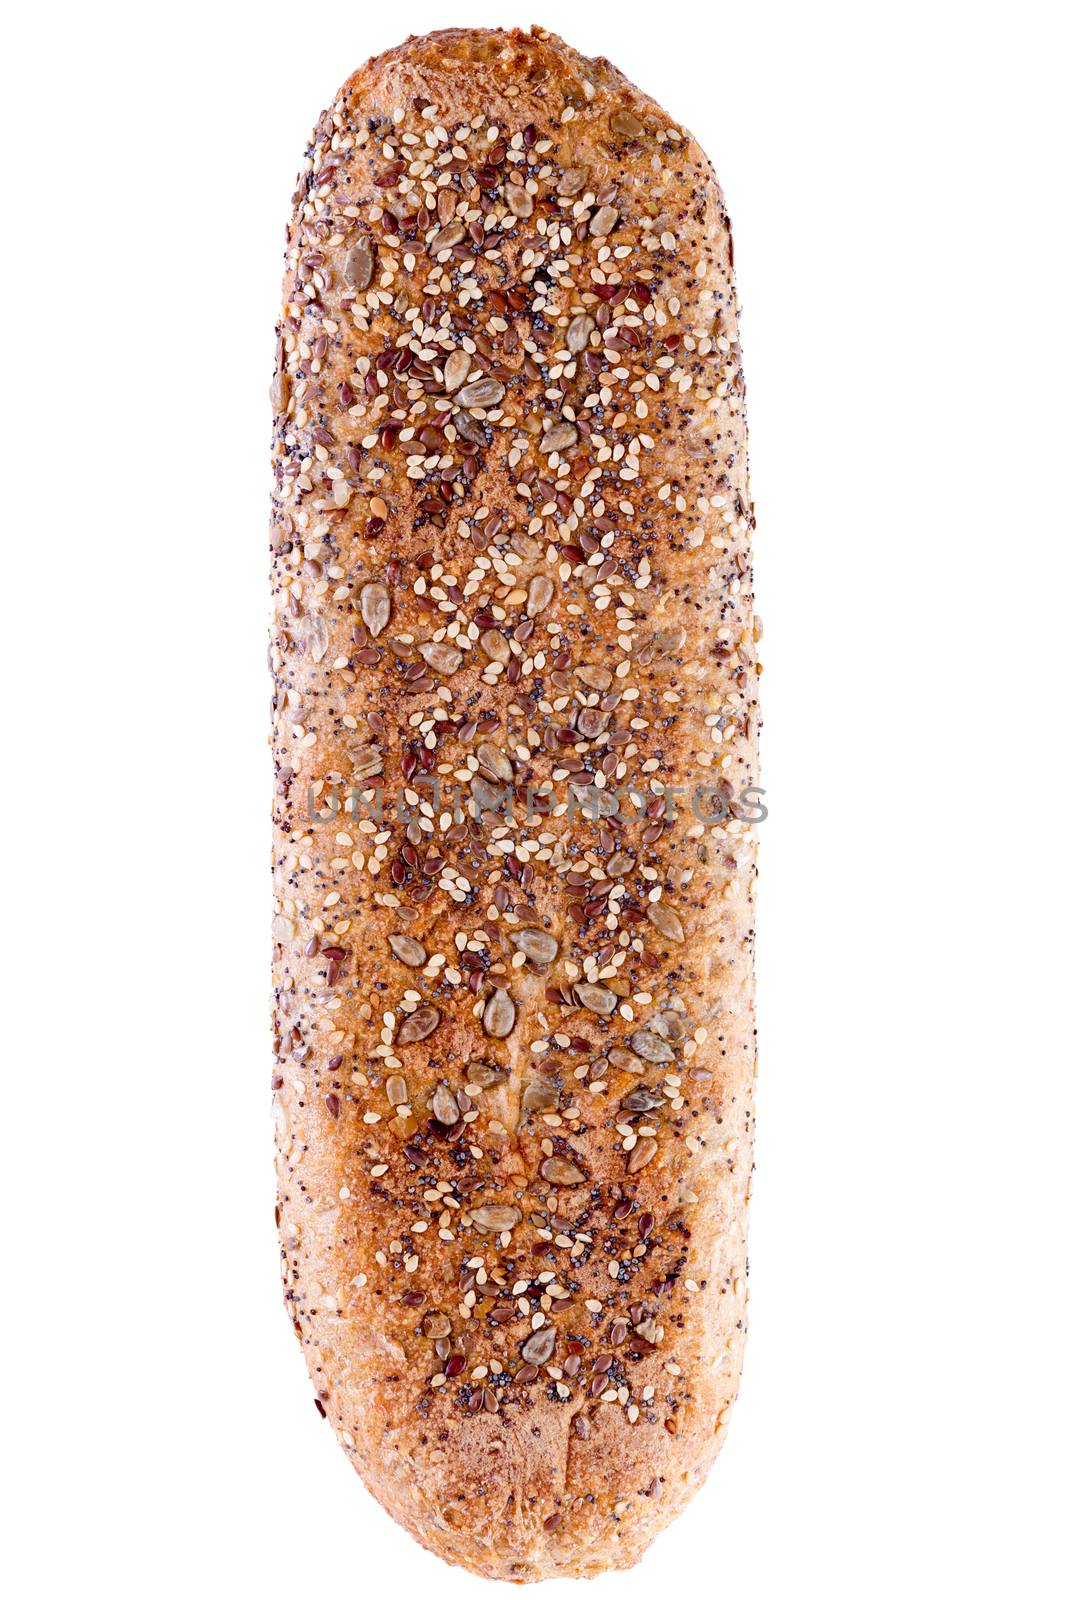 Underneath view of a loaf of freshly baked wholegrain bread covered with sesame seeds isolated on a white background in an aerial view